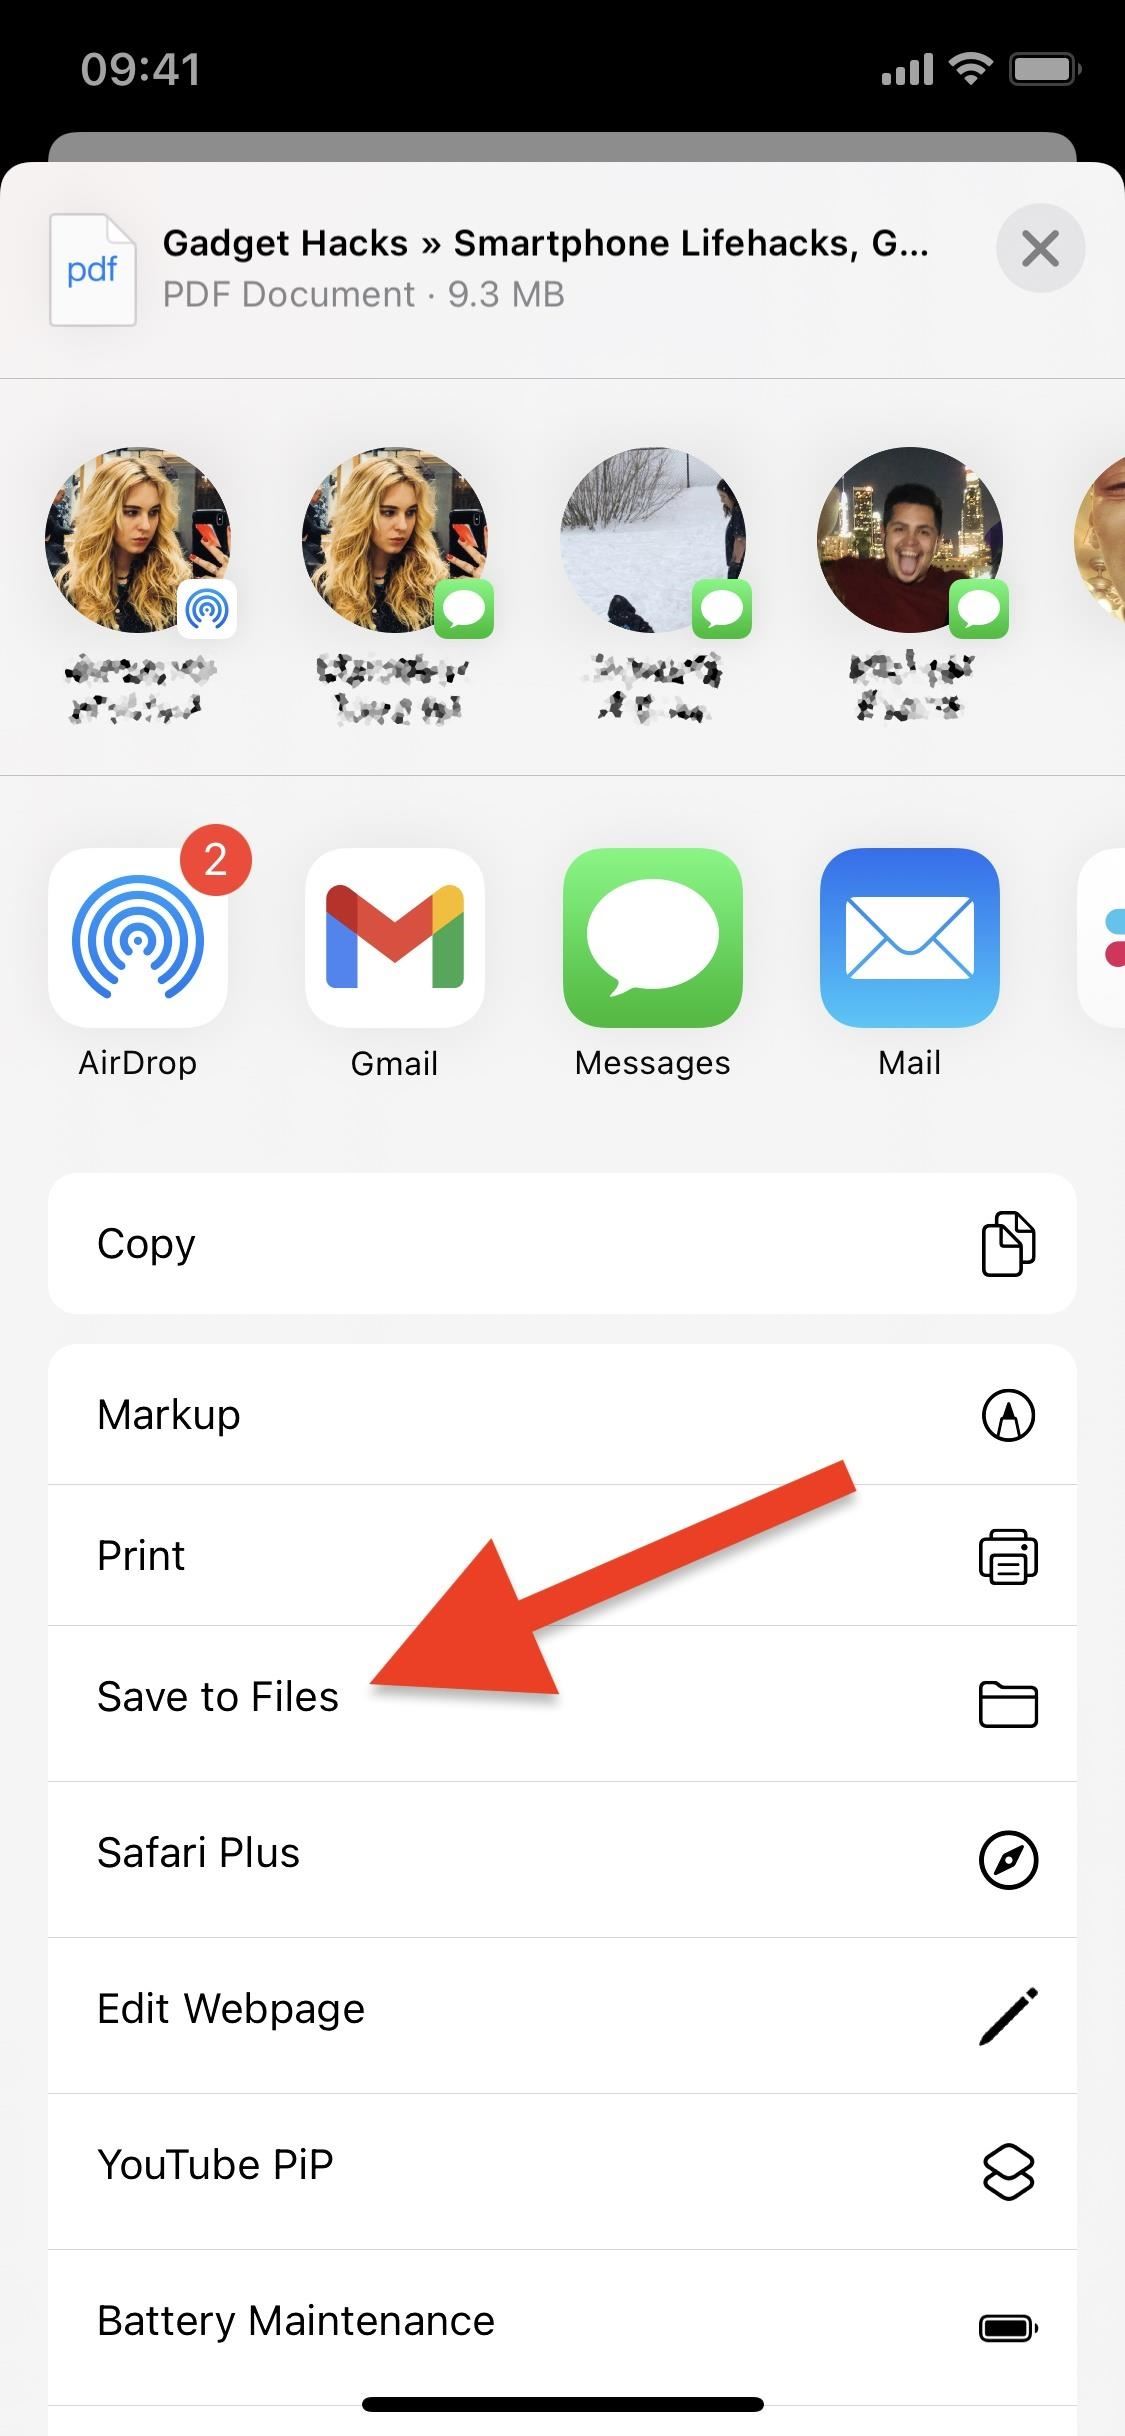 Improve Safari with a PDF Editor, URL Shortener, Bulk Image Saver & More Features on Your iPhone